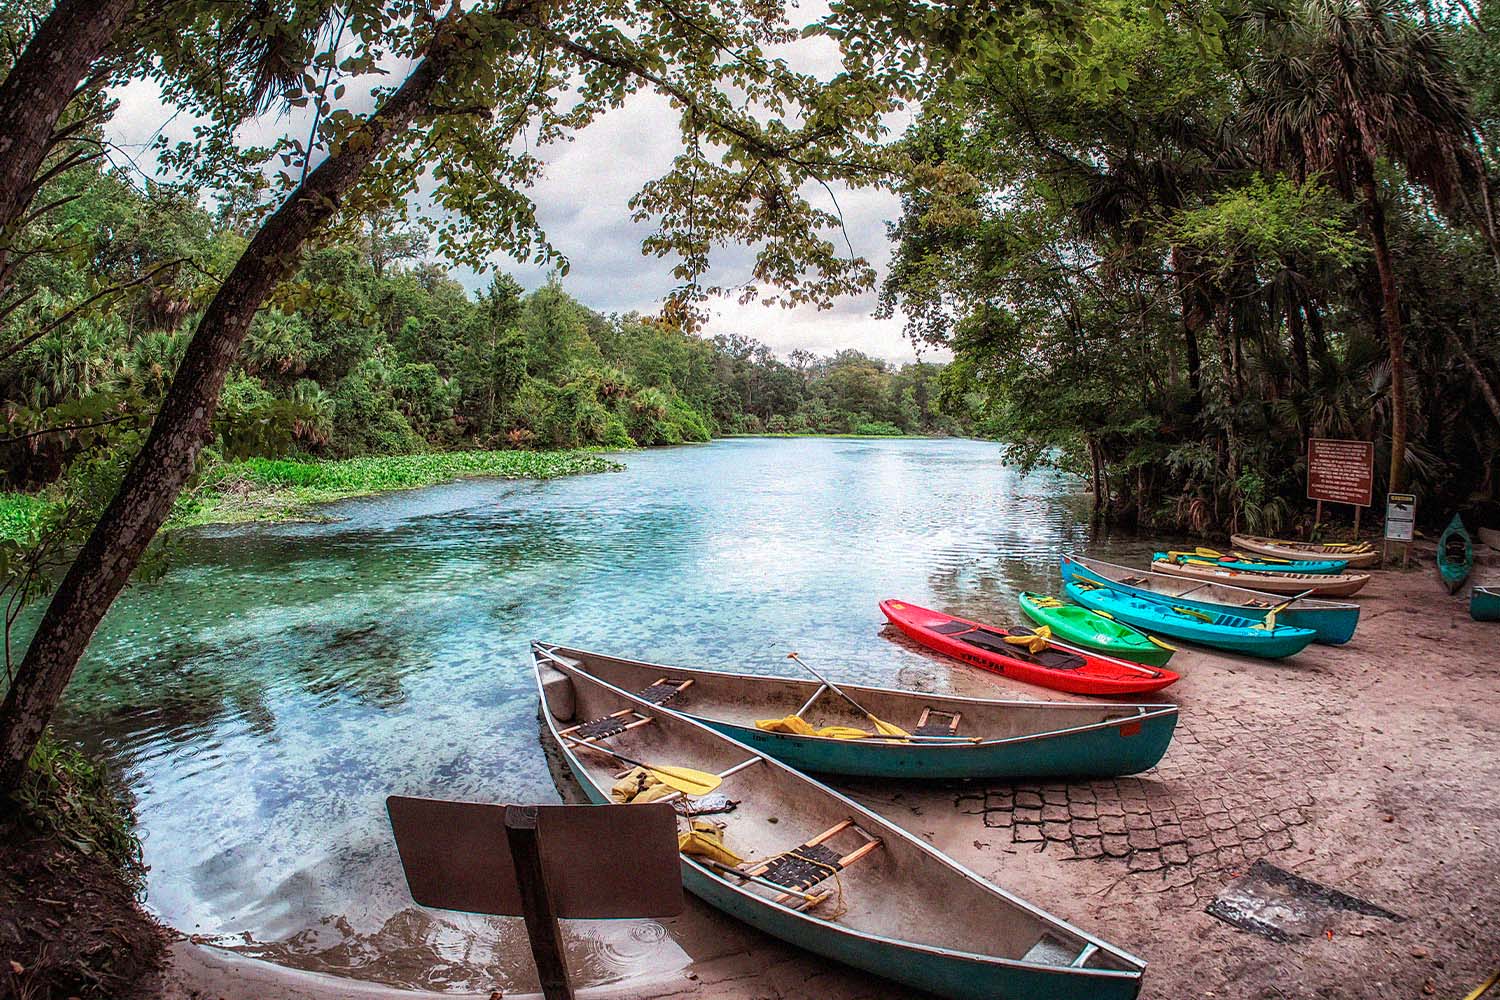 Canoes at Wekiwa Springs State Park in Florida